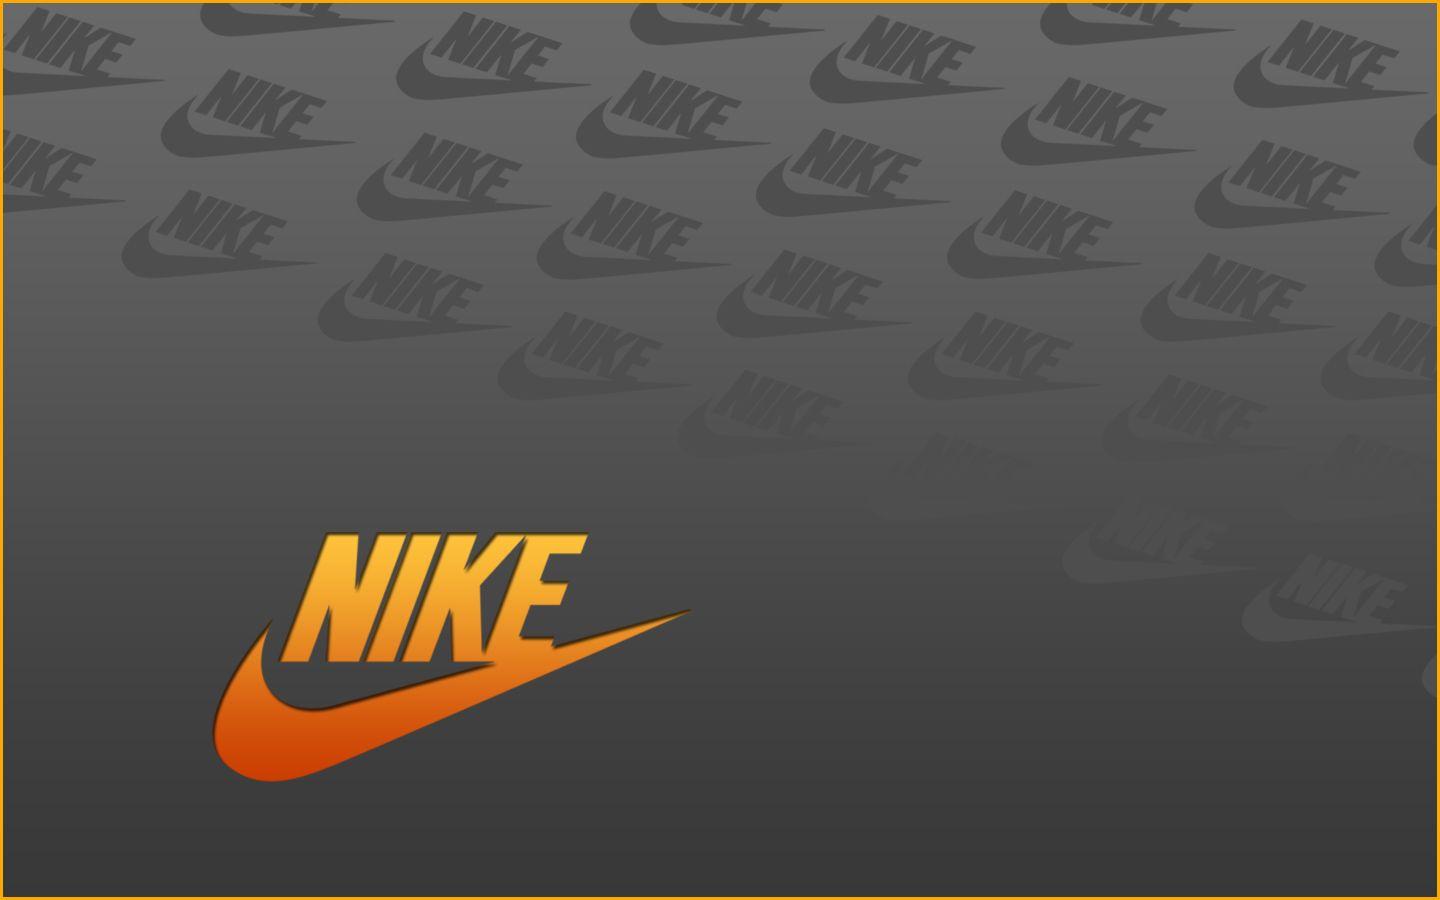 Nike Hd 2 Wallpapers and Backgrounds